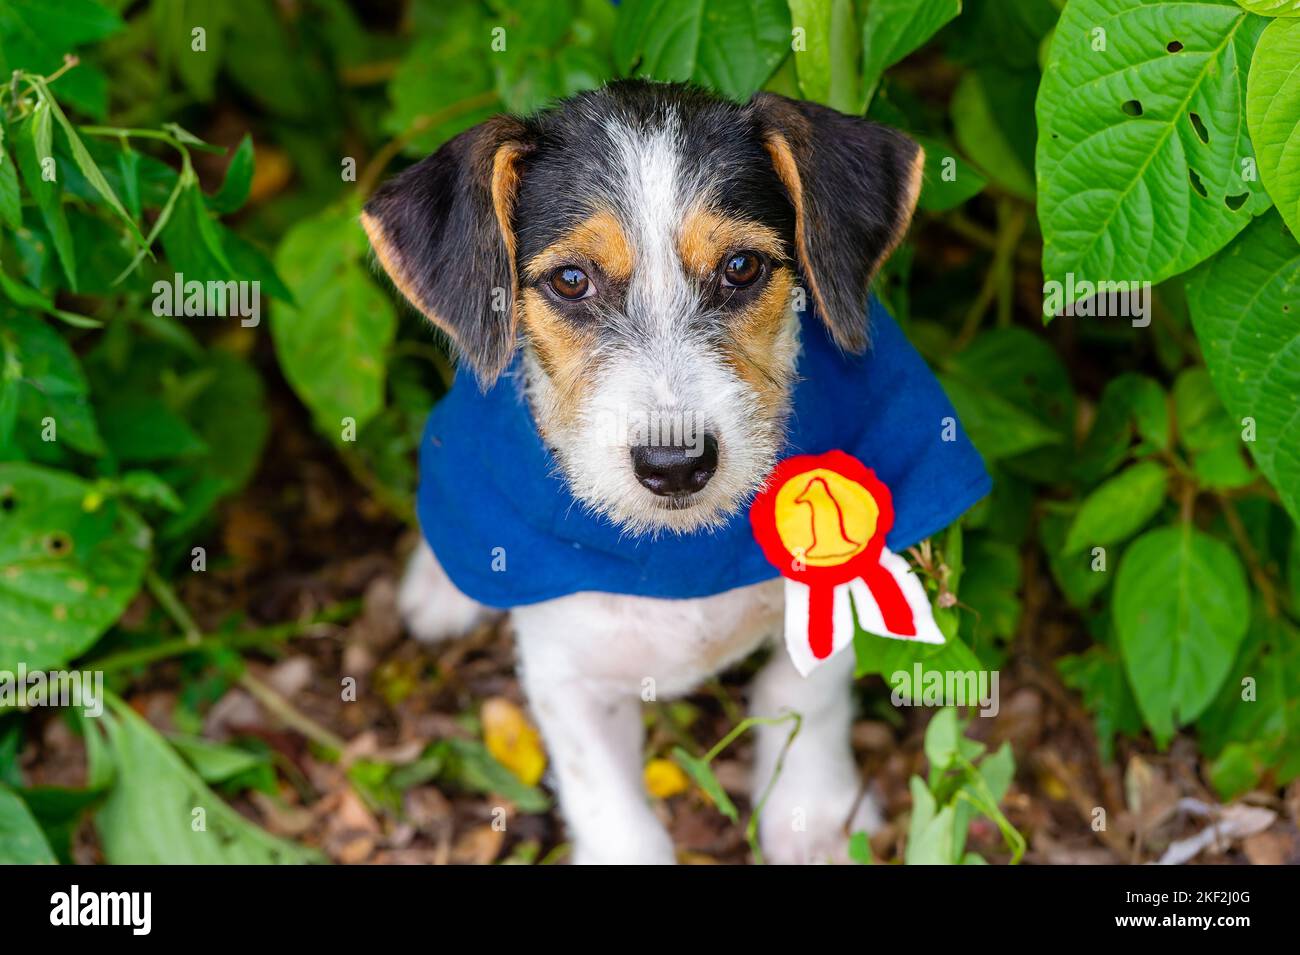 A Cute Adorable Puppy Dog Is Looking Into The Camera Wearing Number One Costume Stock Photo